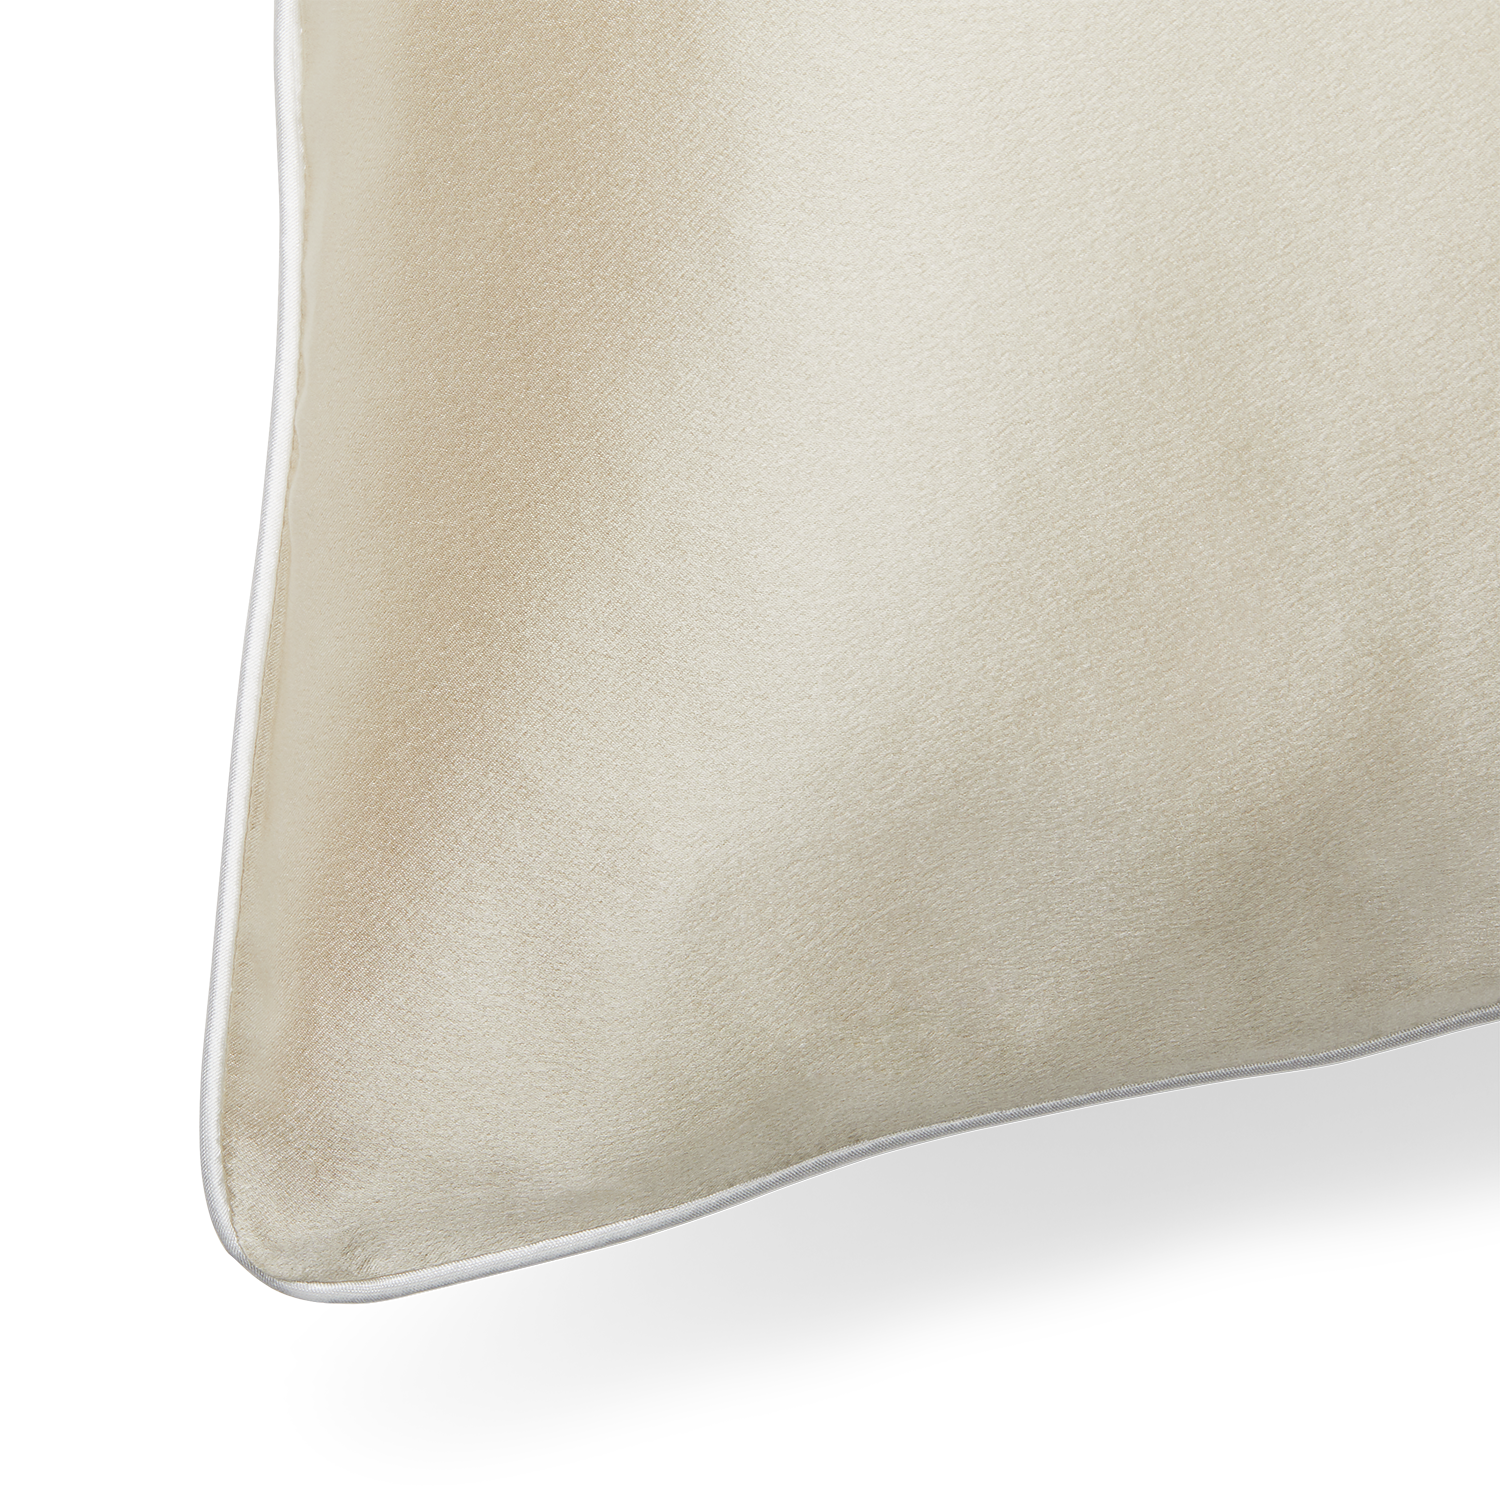 A close up of the piping detail of a KAILU silk pillowcase in champagne with white piping, made with the highest-quality, OEKO-TEX-certified mulberry silk in 25 momme silk weight